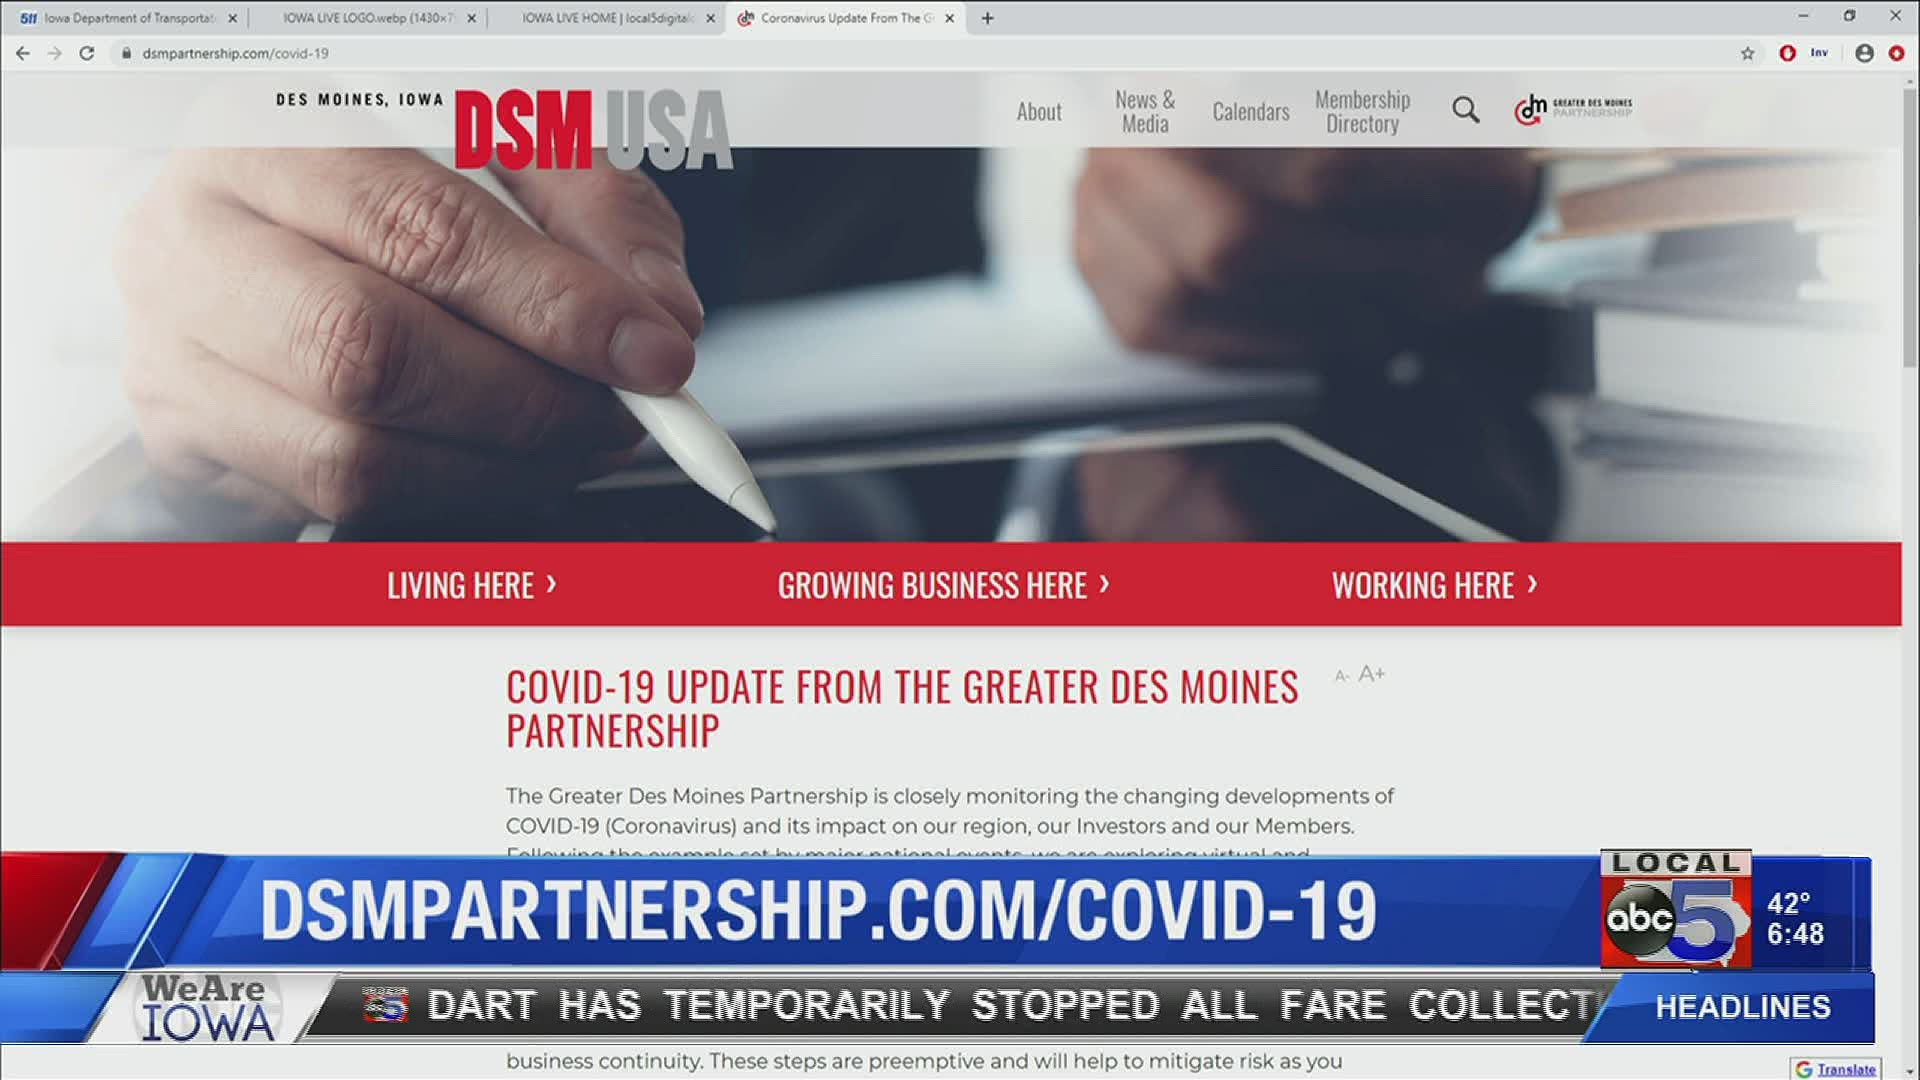 As COVID-19 updates change with increasing speed, The Greater Des Moines Partnership shared their advice for small business owners.